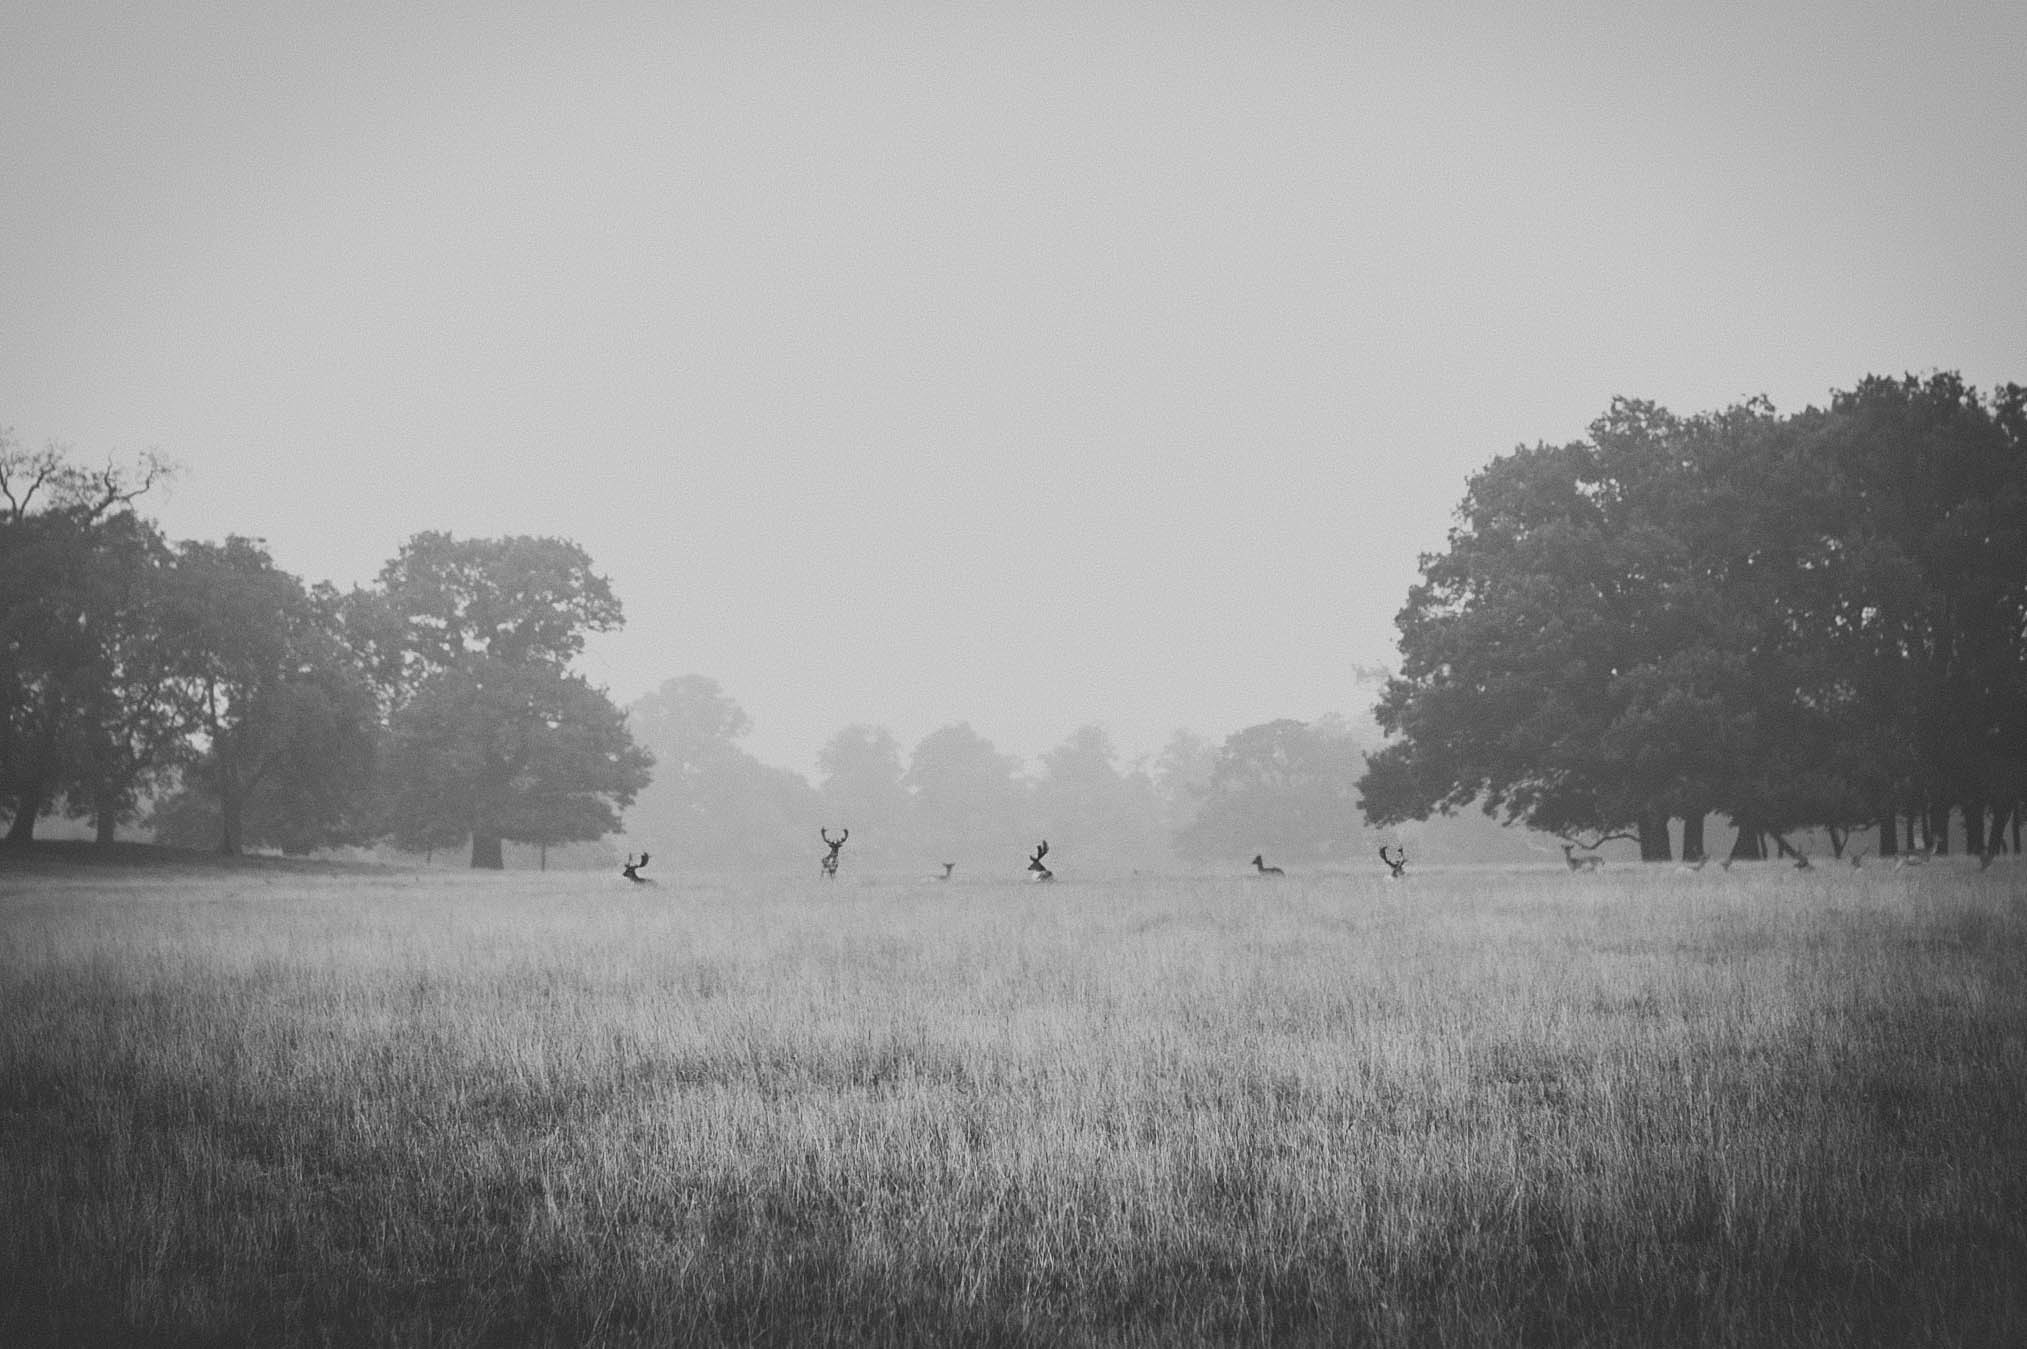 General 2027x1349 monochrome animals landscape deer field mist trees gray nature grass stags antlers